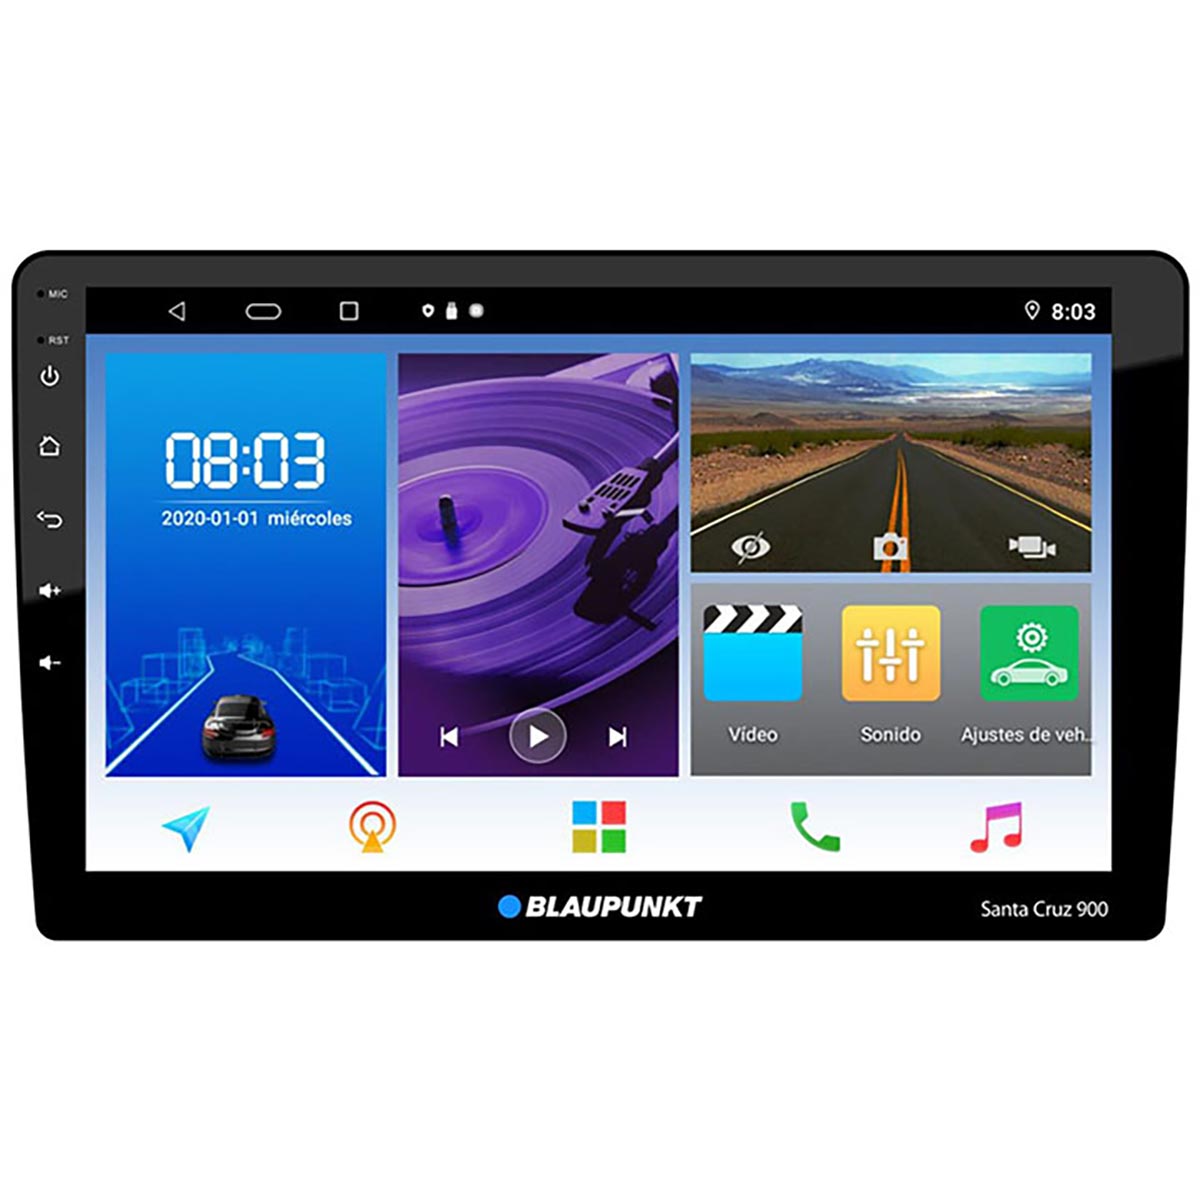 BLAUPUNKT SANTA CRUZ 900 10.1” Double DIN MECHLESS Fixed Face Touchscreen Receiver with PhoneLINK Wi-Fi Bluetooth